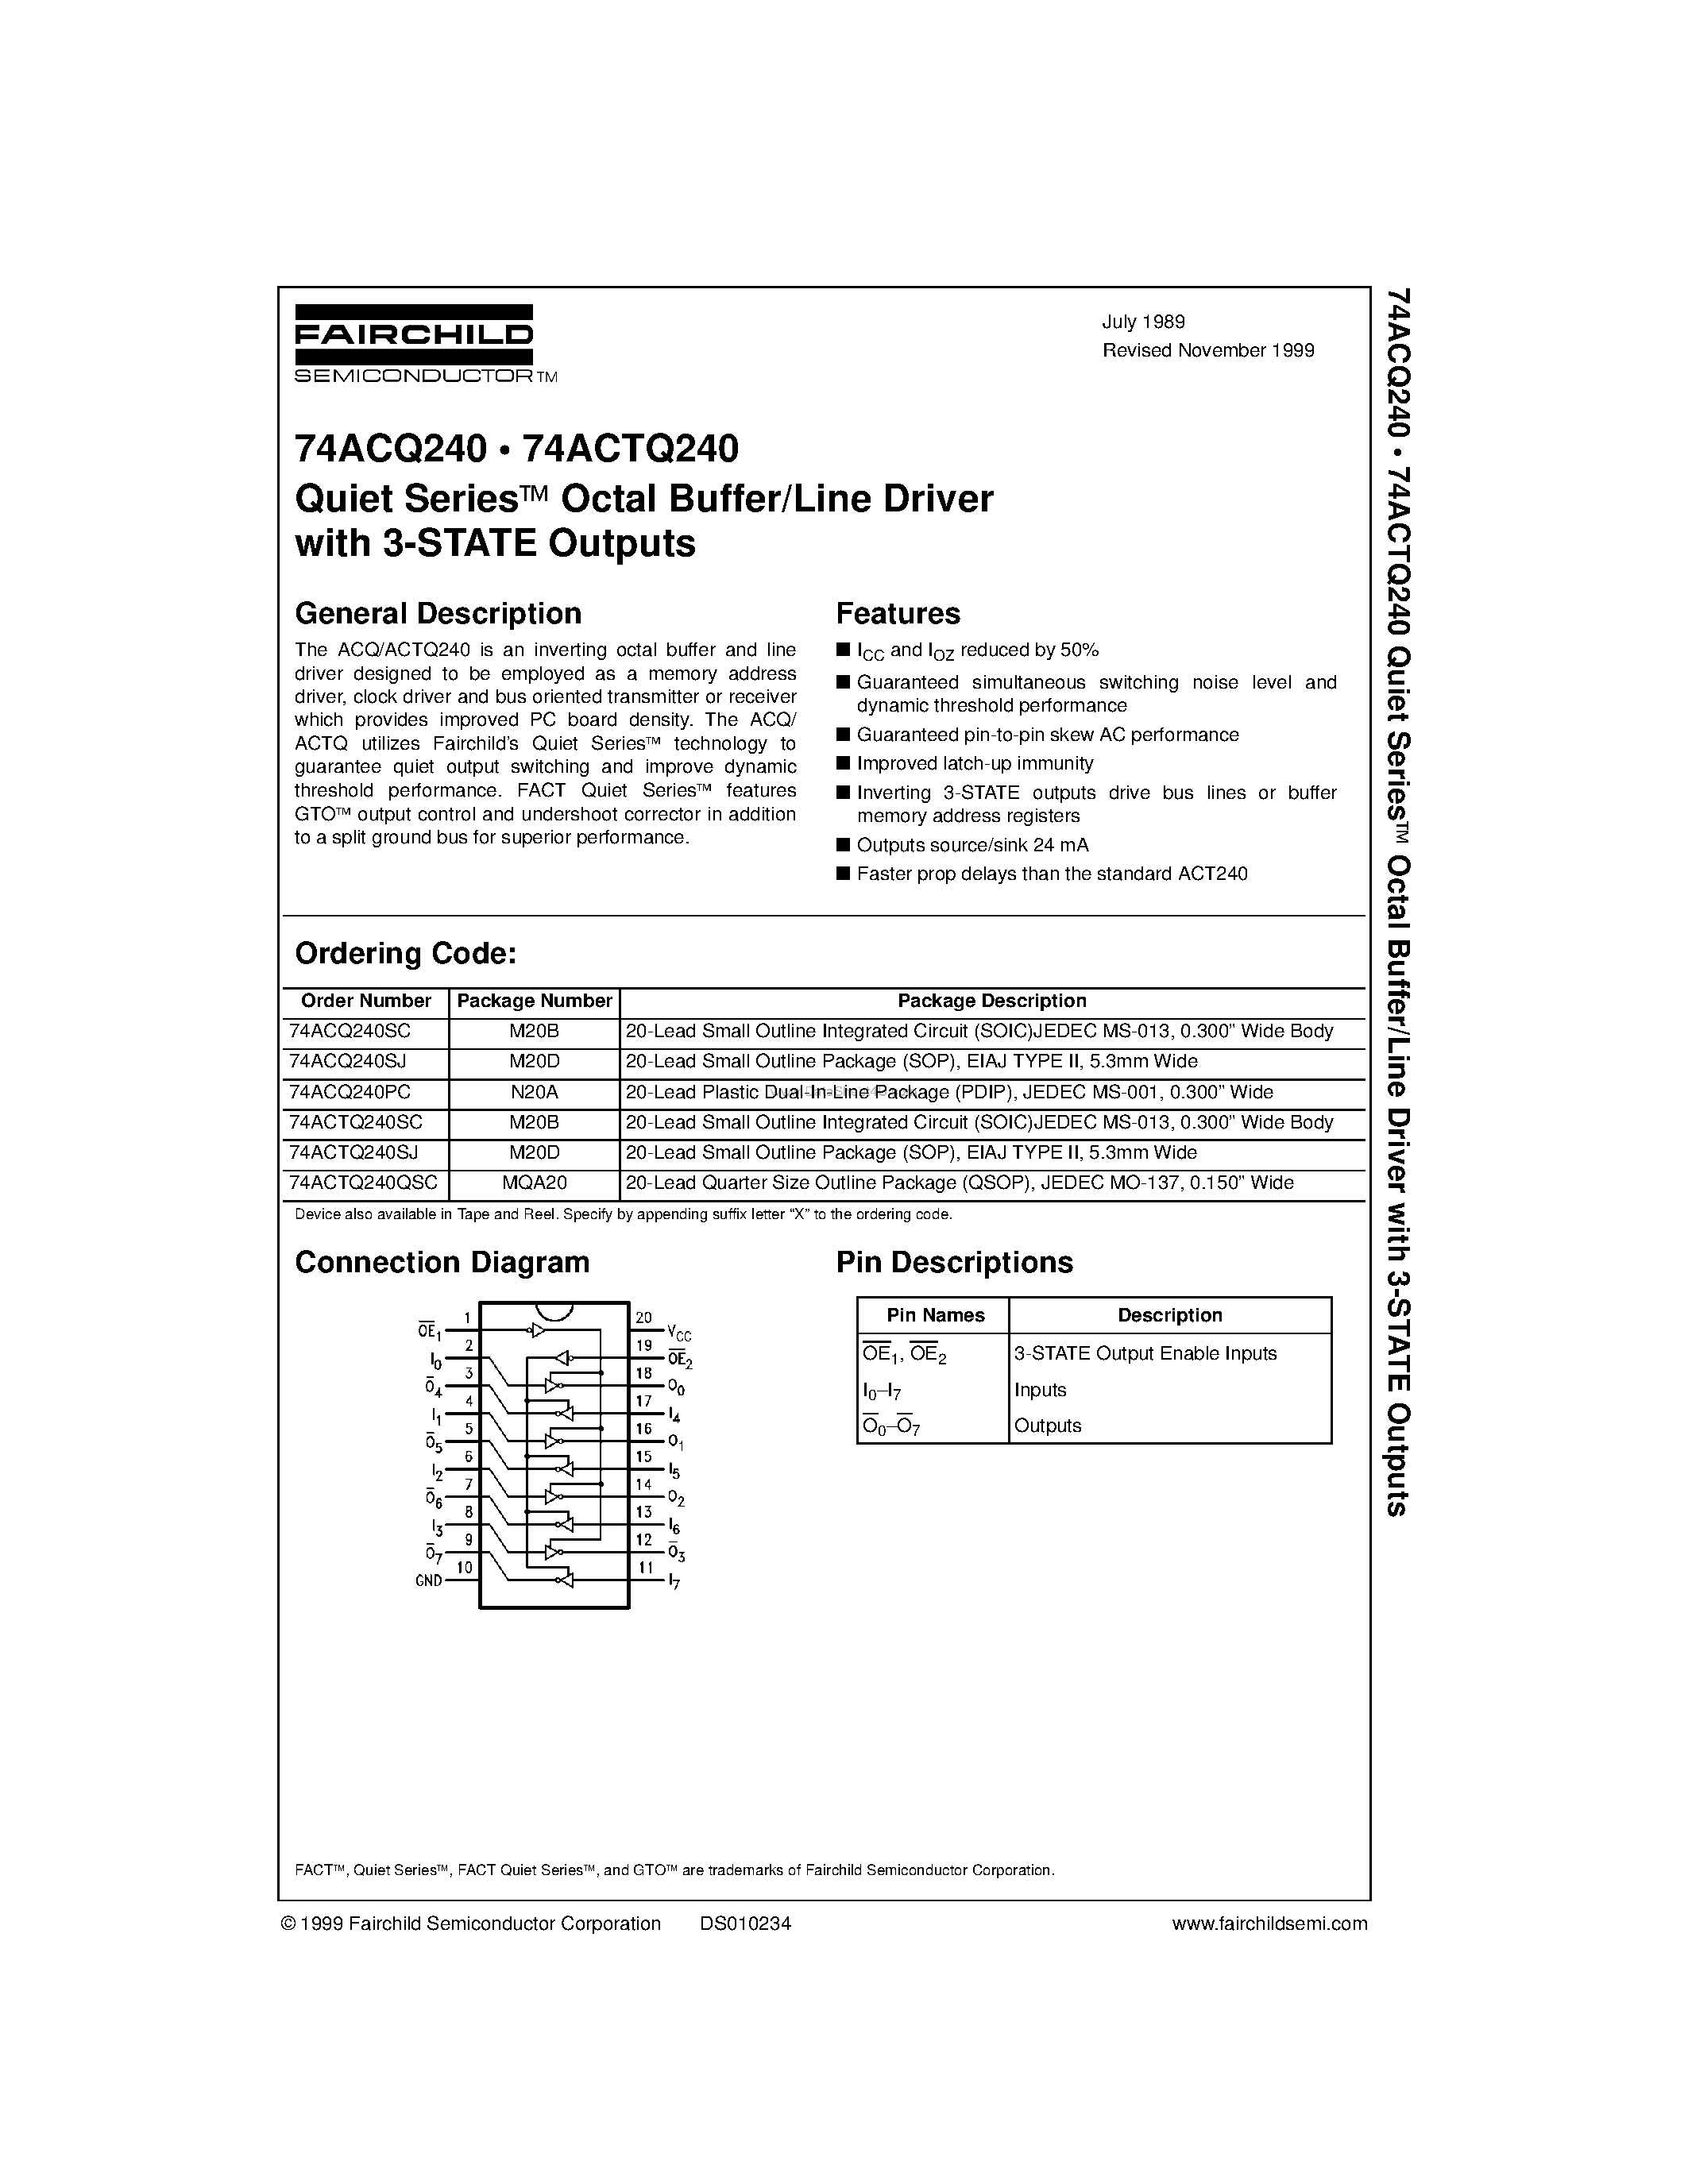 Datasheet 74ACQ240 - Quiet Series. Octal Buffer/Line Driver with 3-STATE Outputs page 1